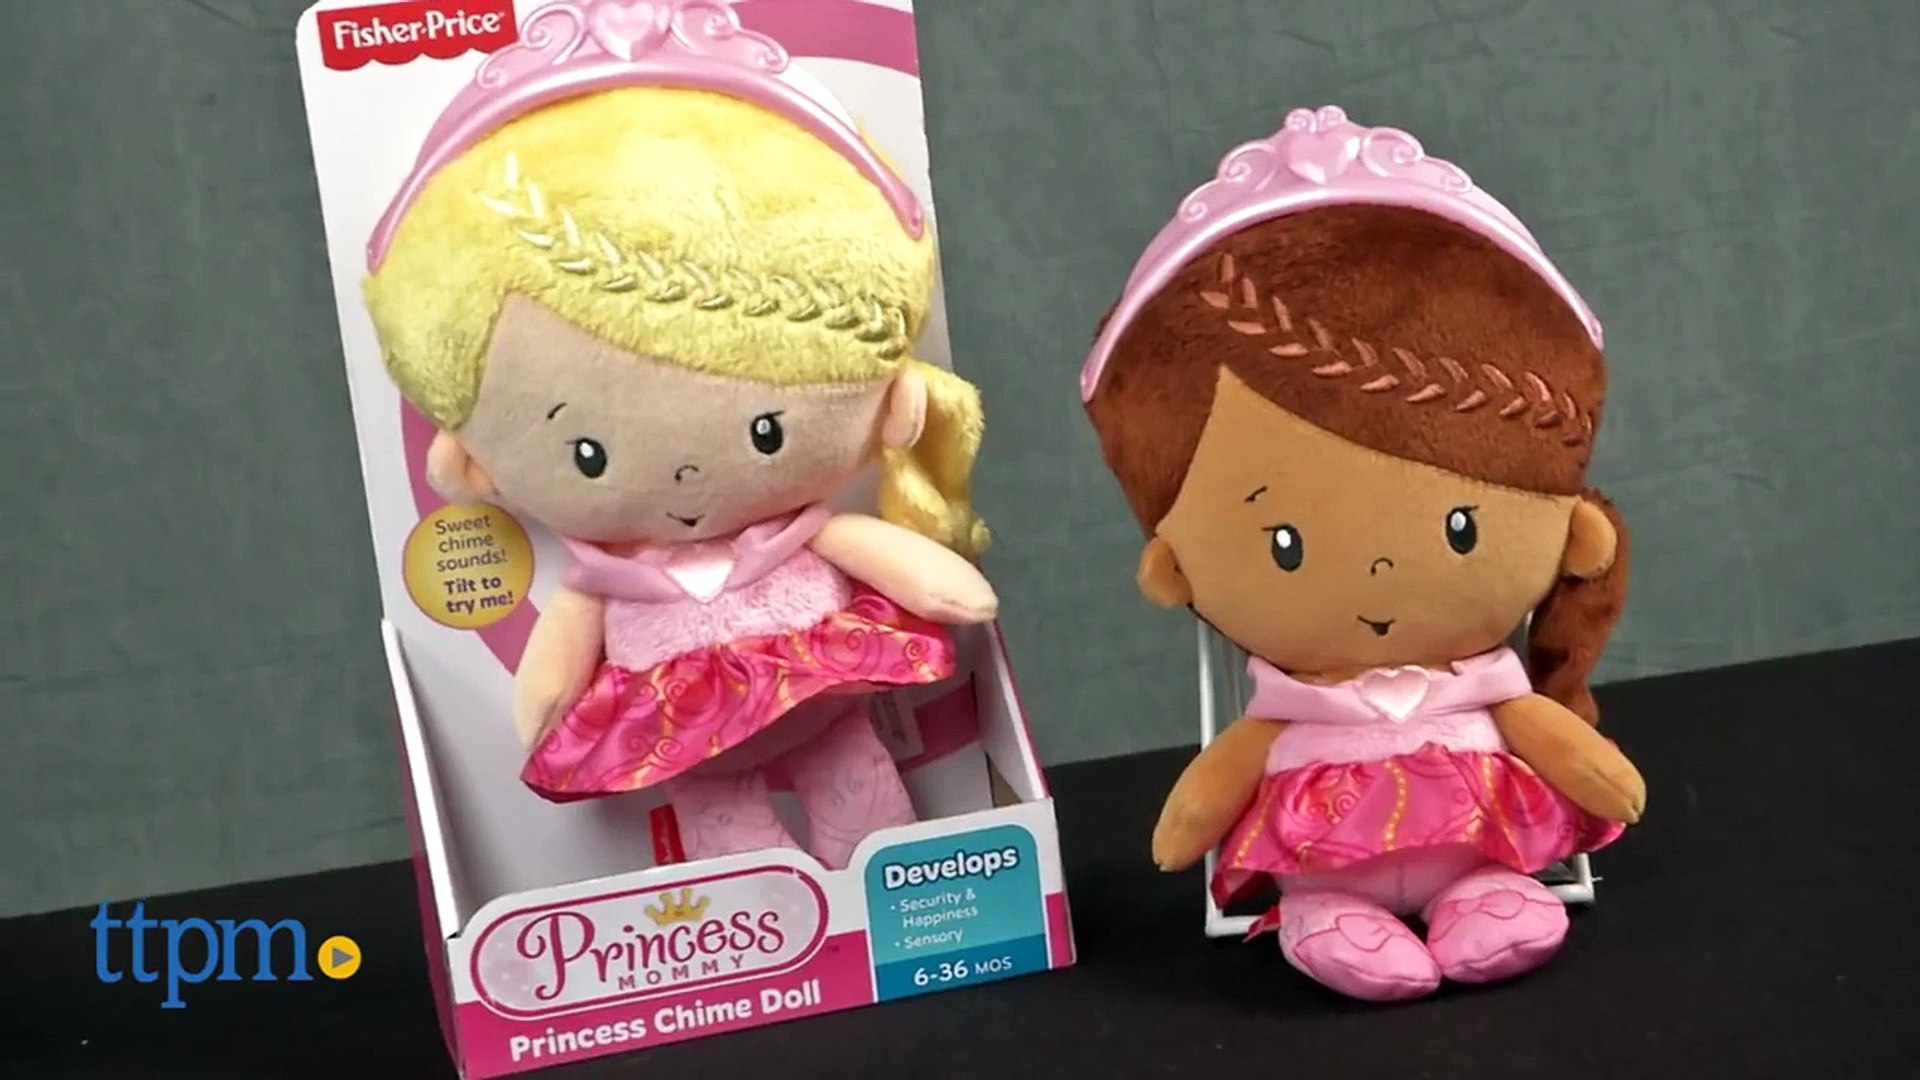 Princess Mommy Princess Chime Doll from Fisher-Price - video Dailymotion